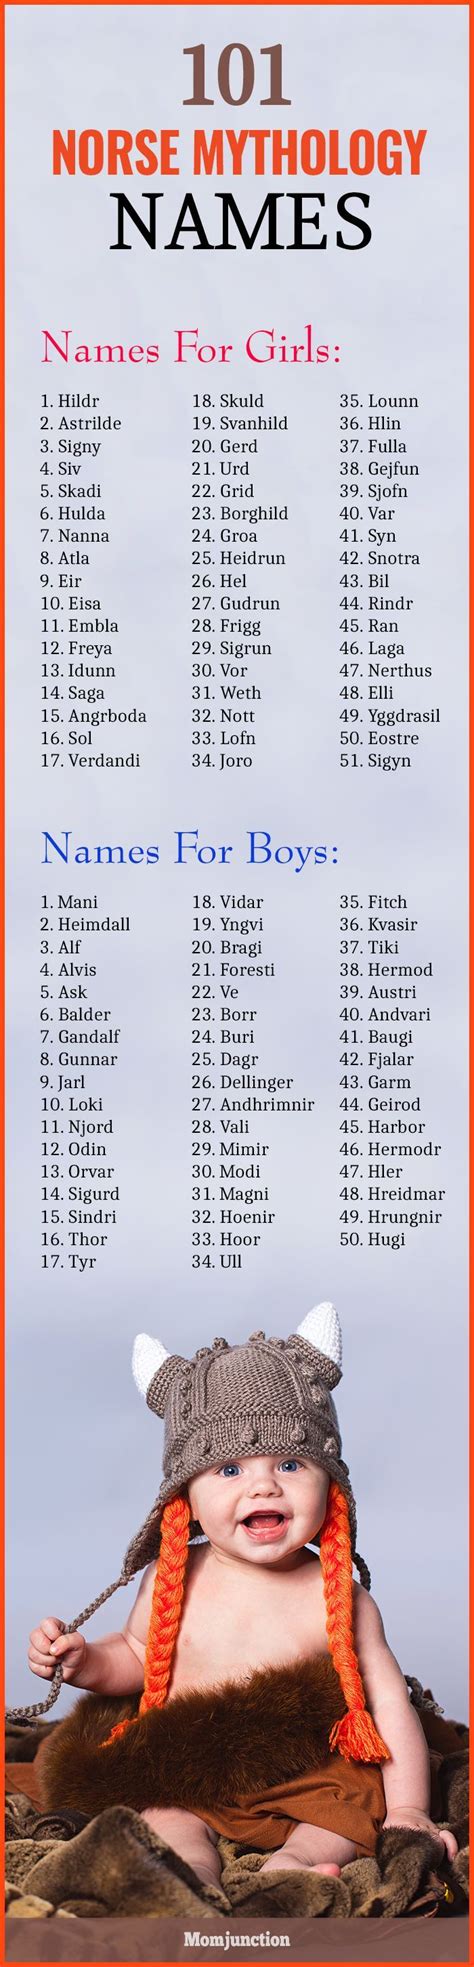 101 most popular norse mythology names with meanings norse mythology names norse mythology